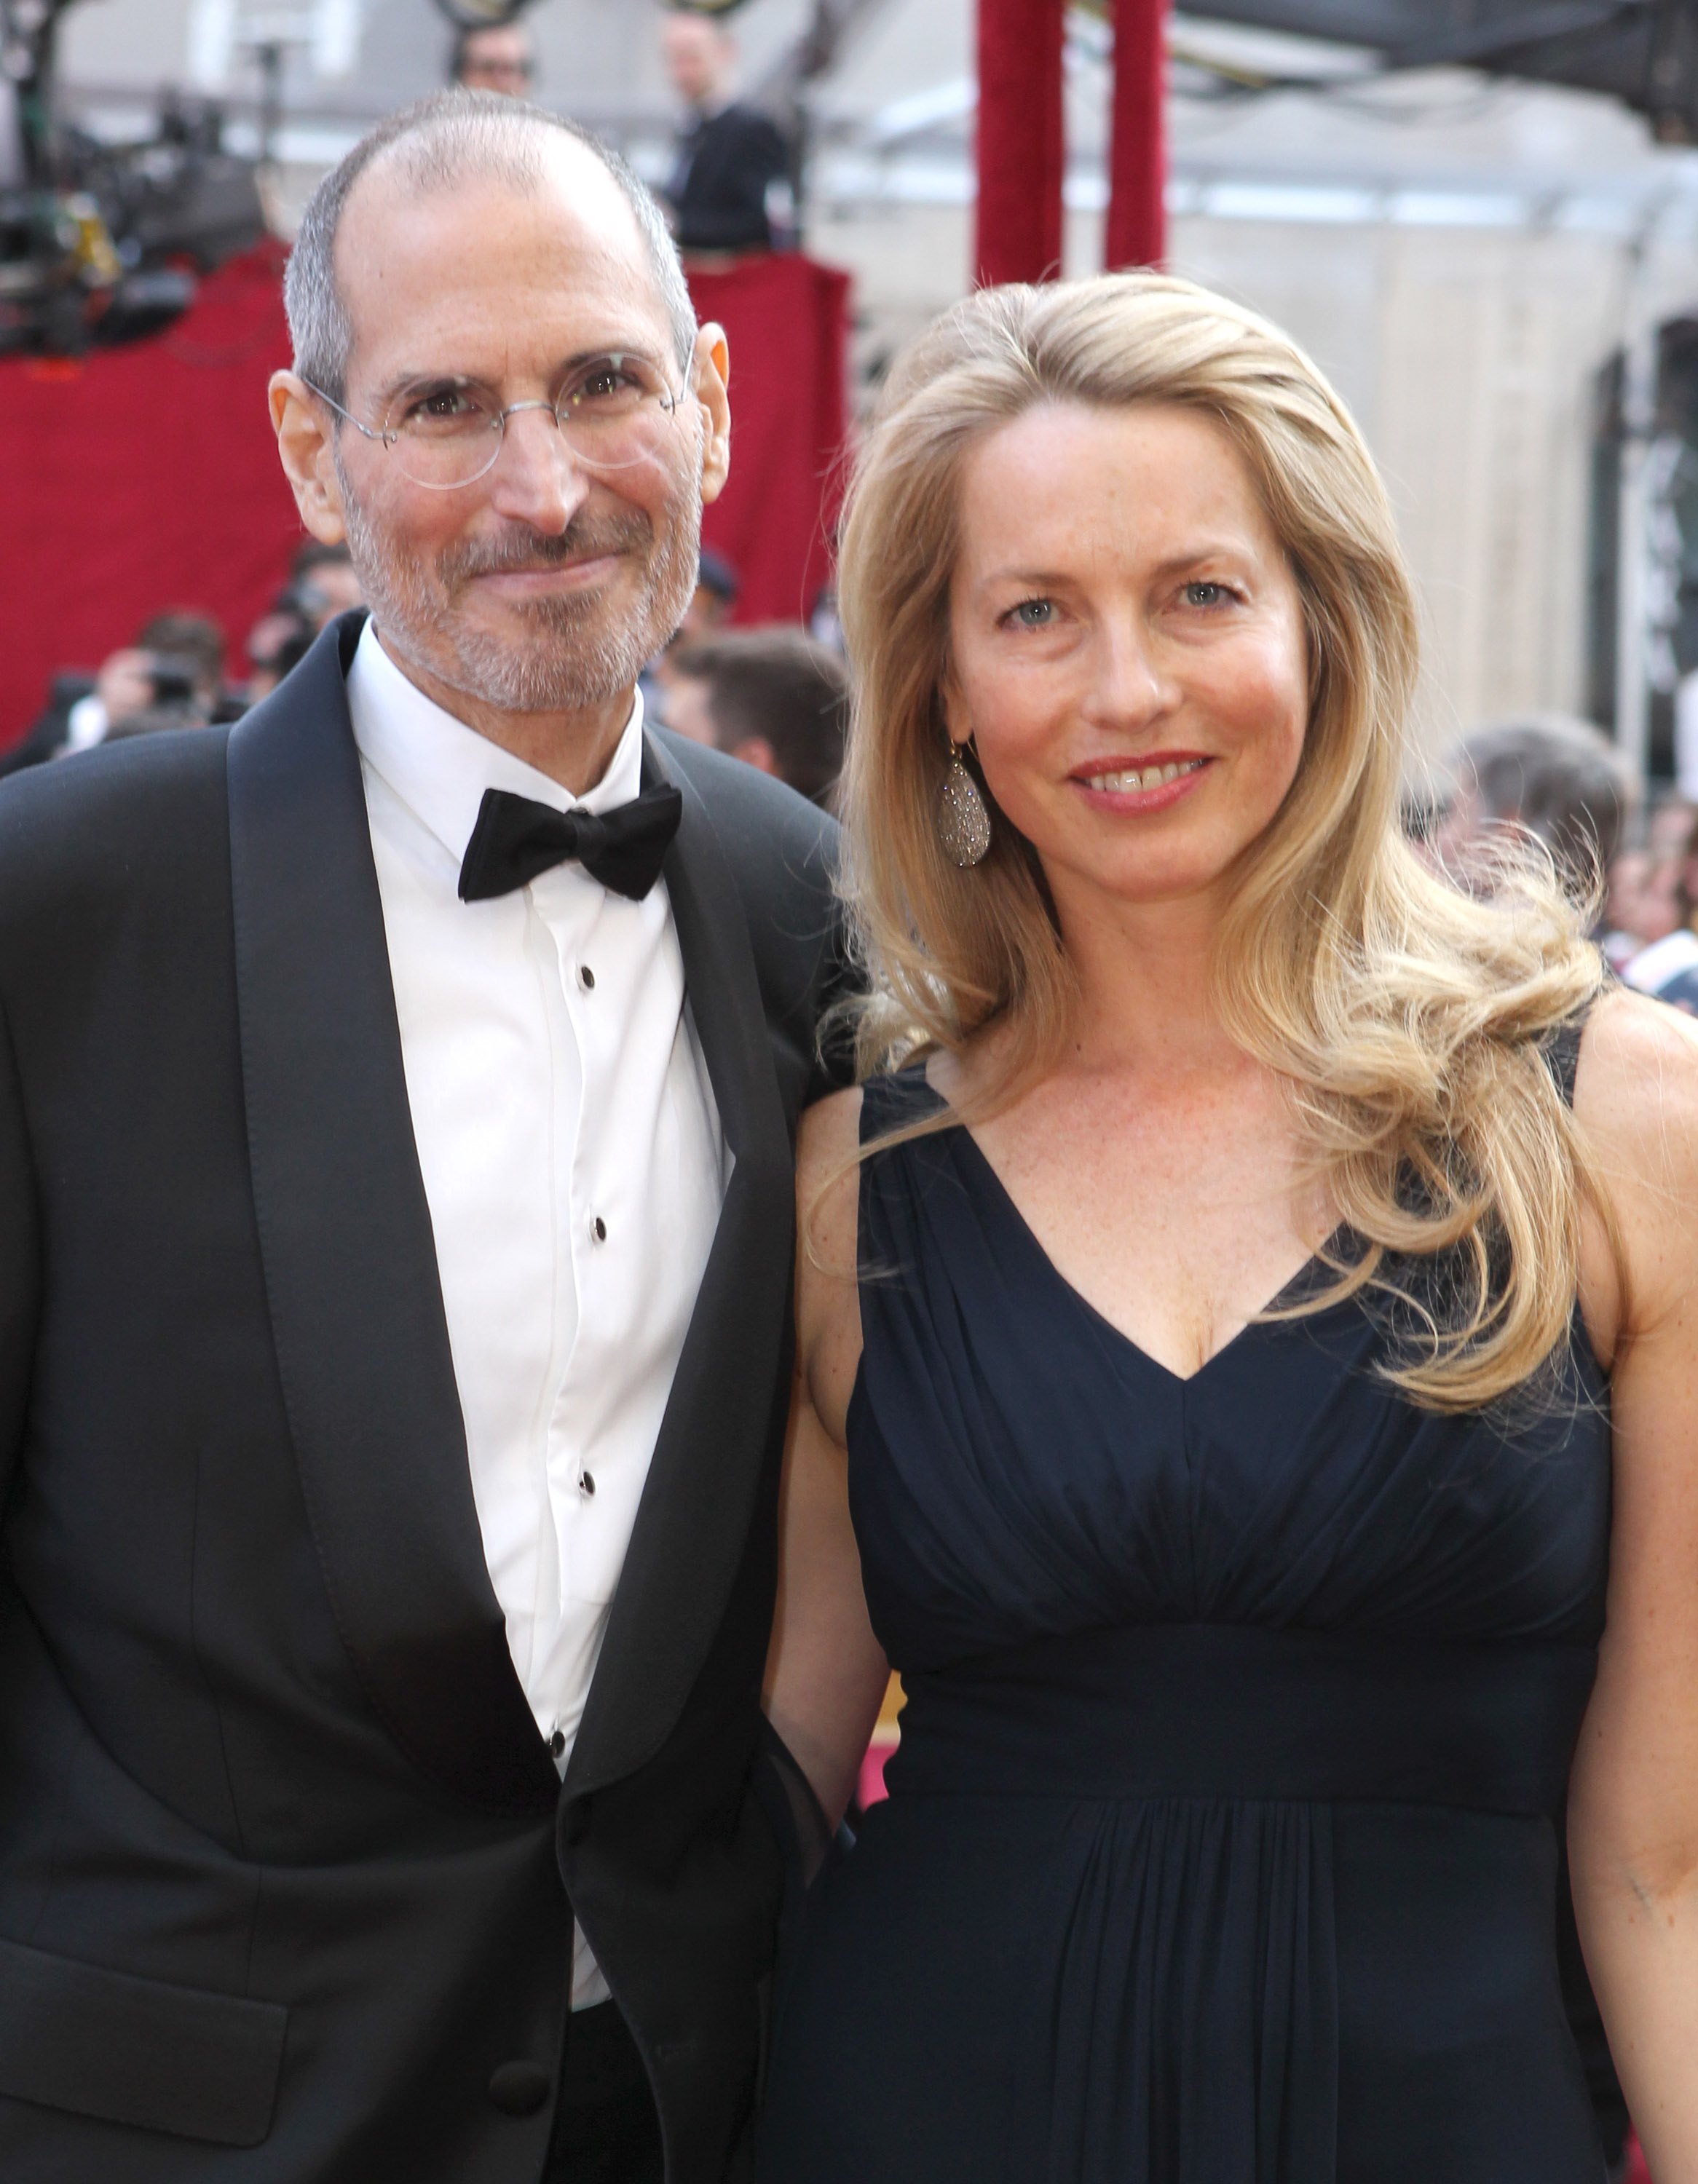  Steve Jobs and Laurene Powell arrive at the 82nd Annual Academy Awards held at Kodak Theatre on March 7, 2010 | Photo: Getty Images